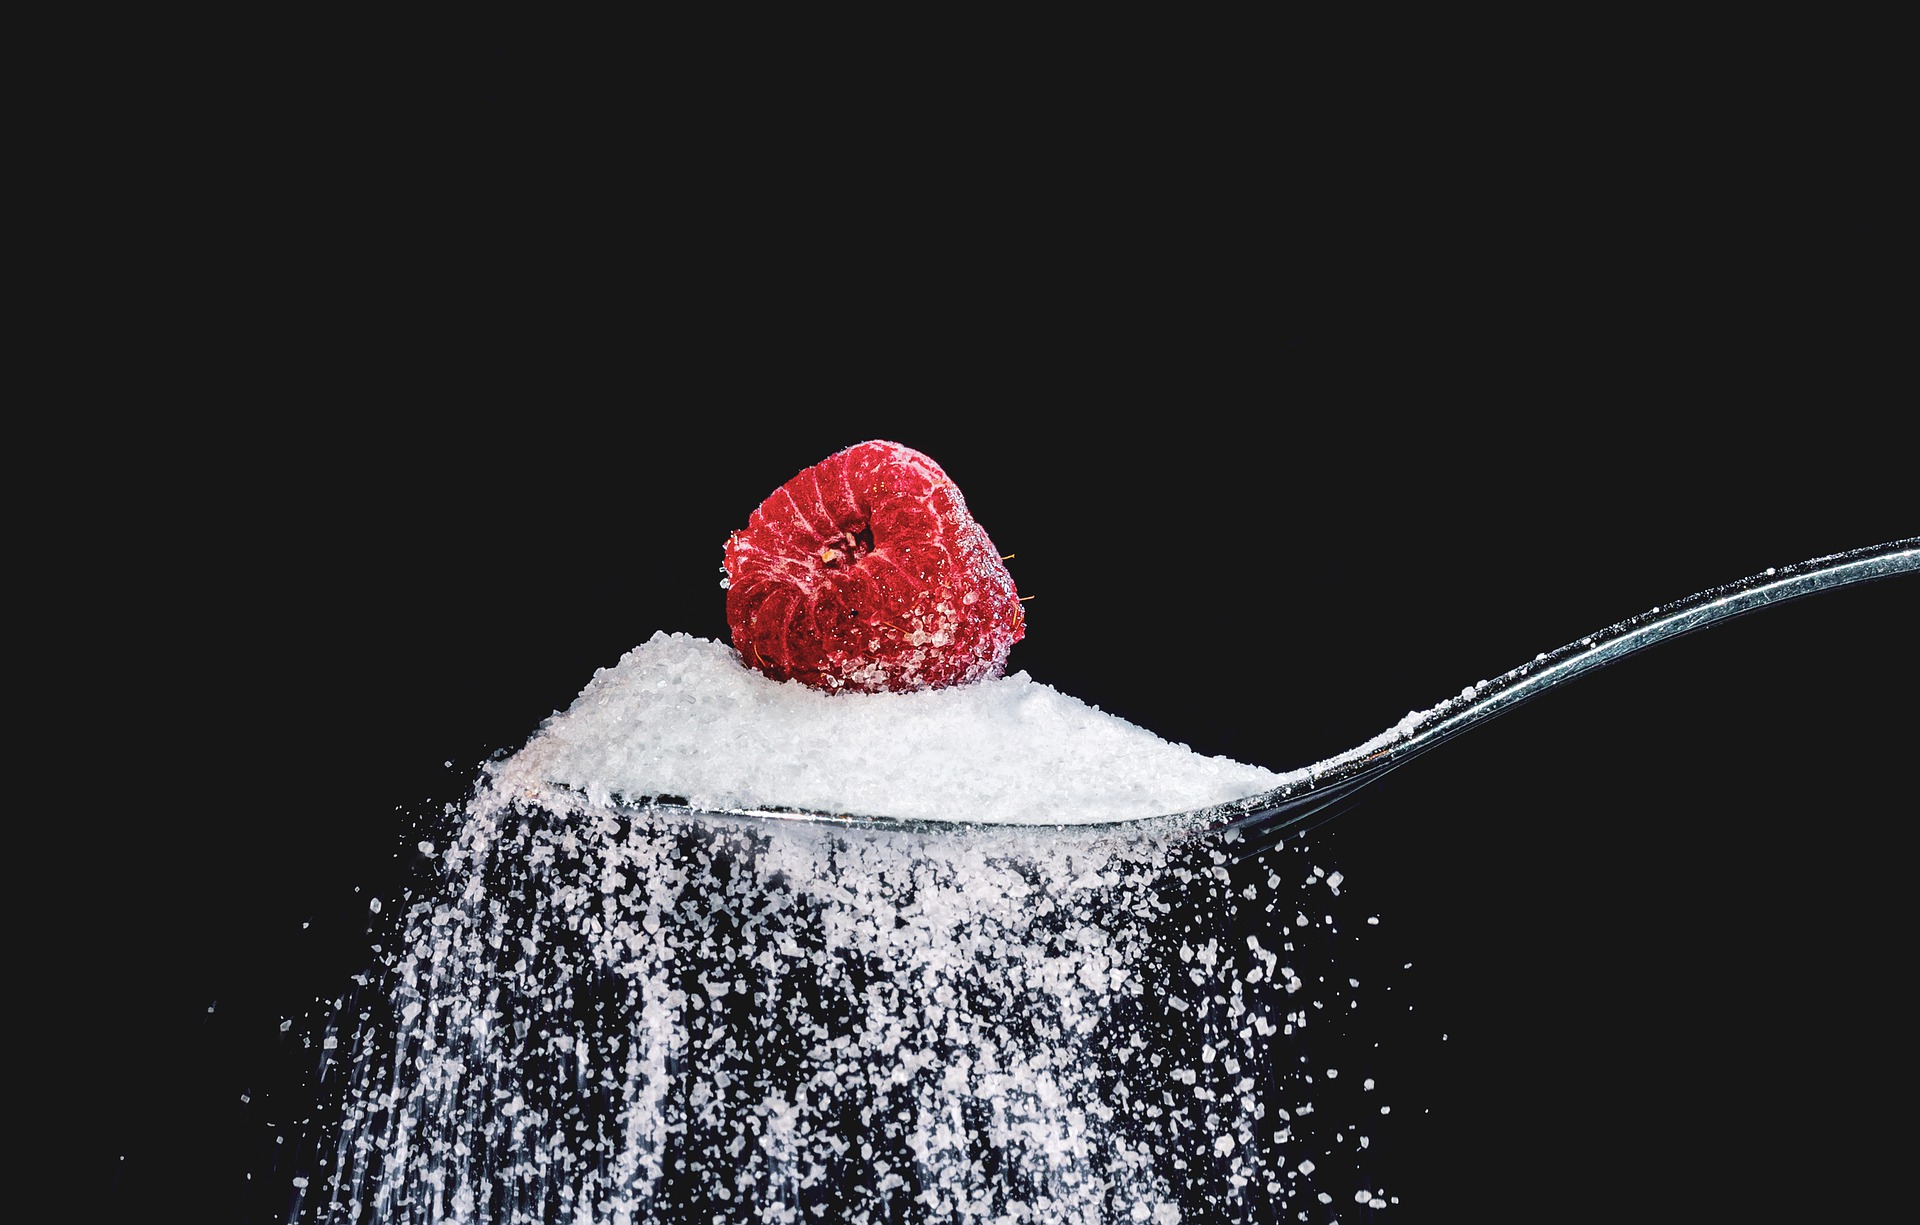 Are artificial sugars bad for you?